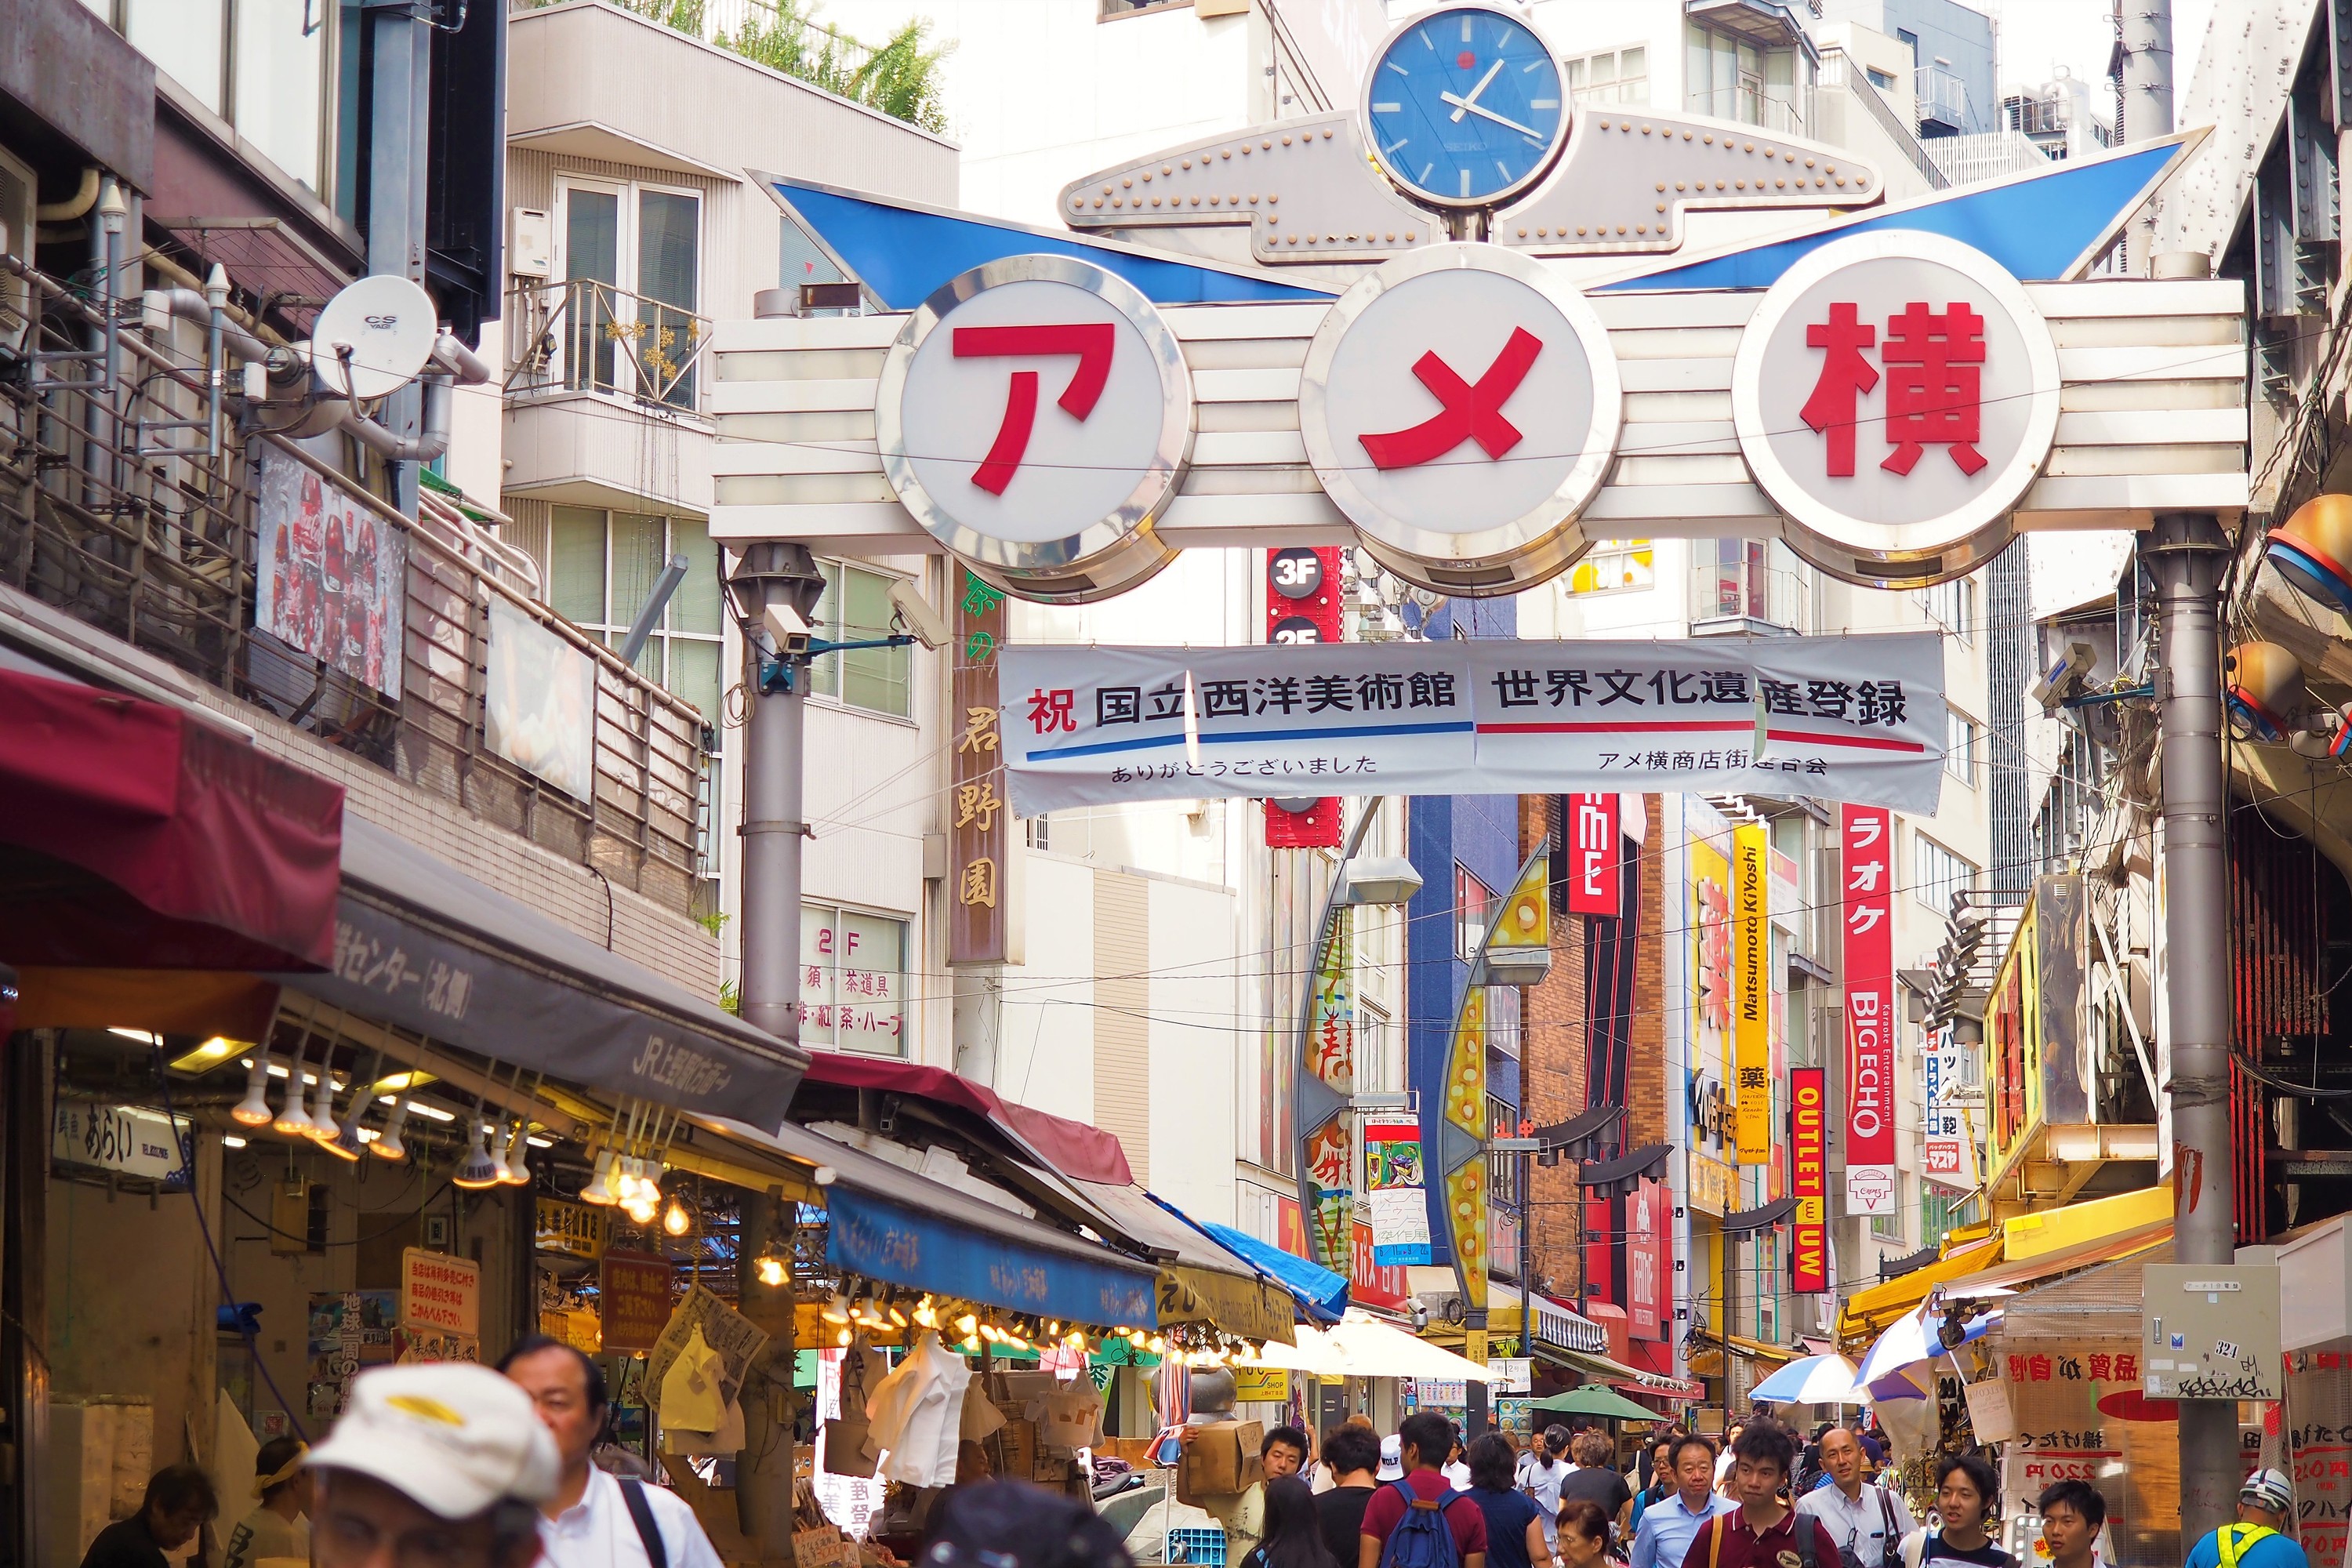 Ultimate guide to the recommended sightseeing spots in Ueno: from shopping to gourmet, parks, museums, art galleries, and more!